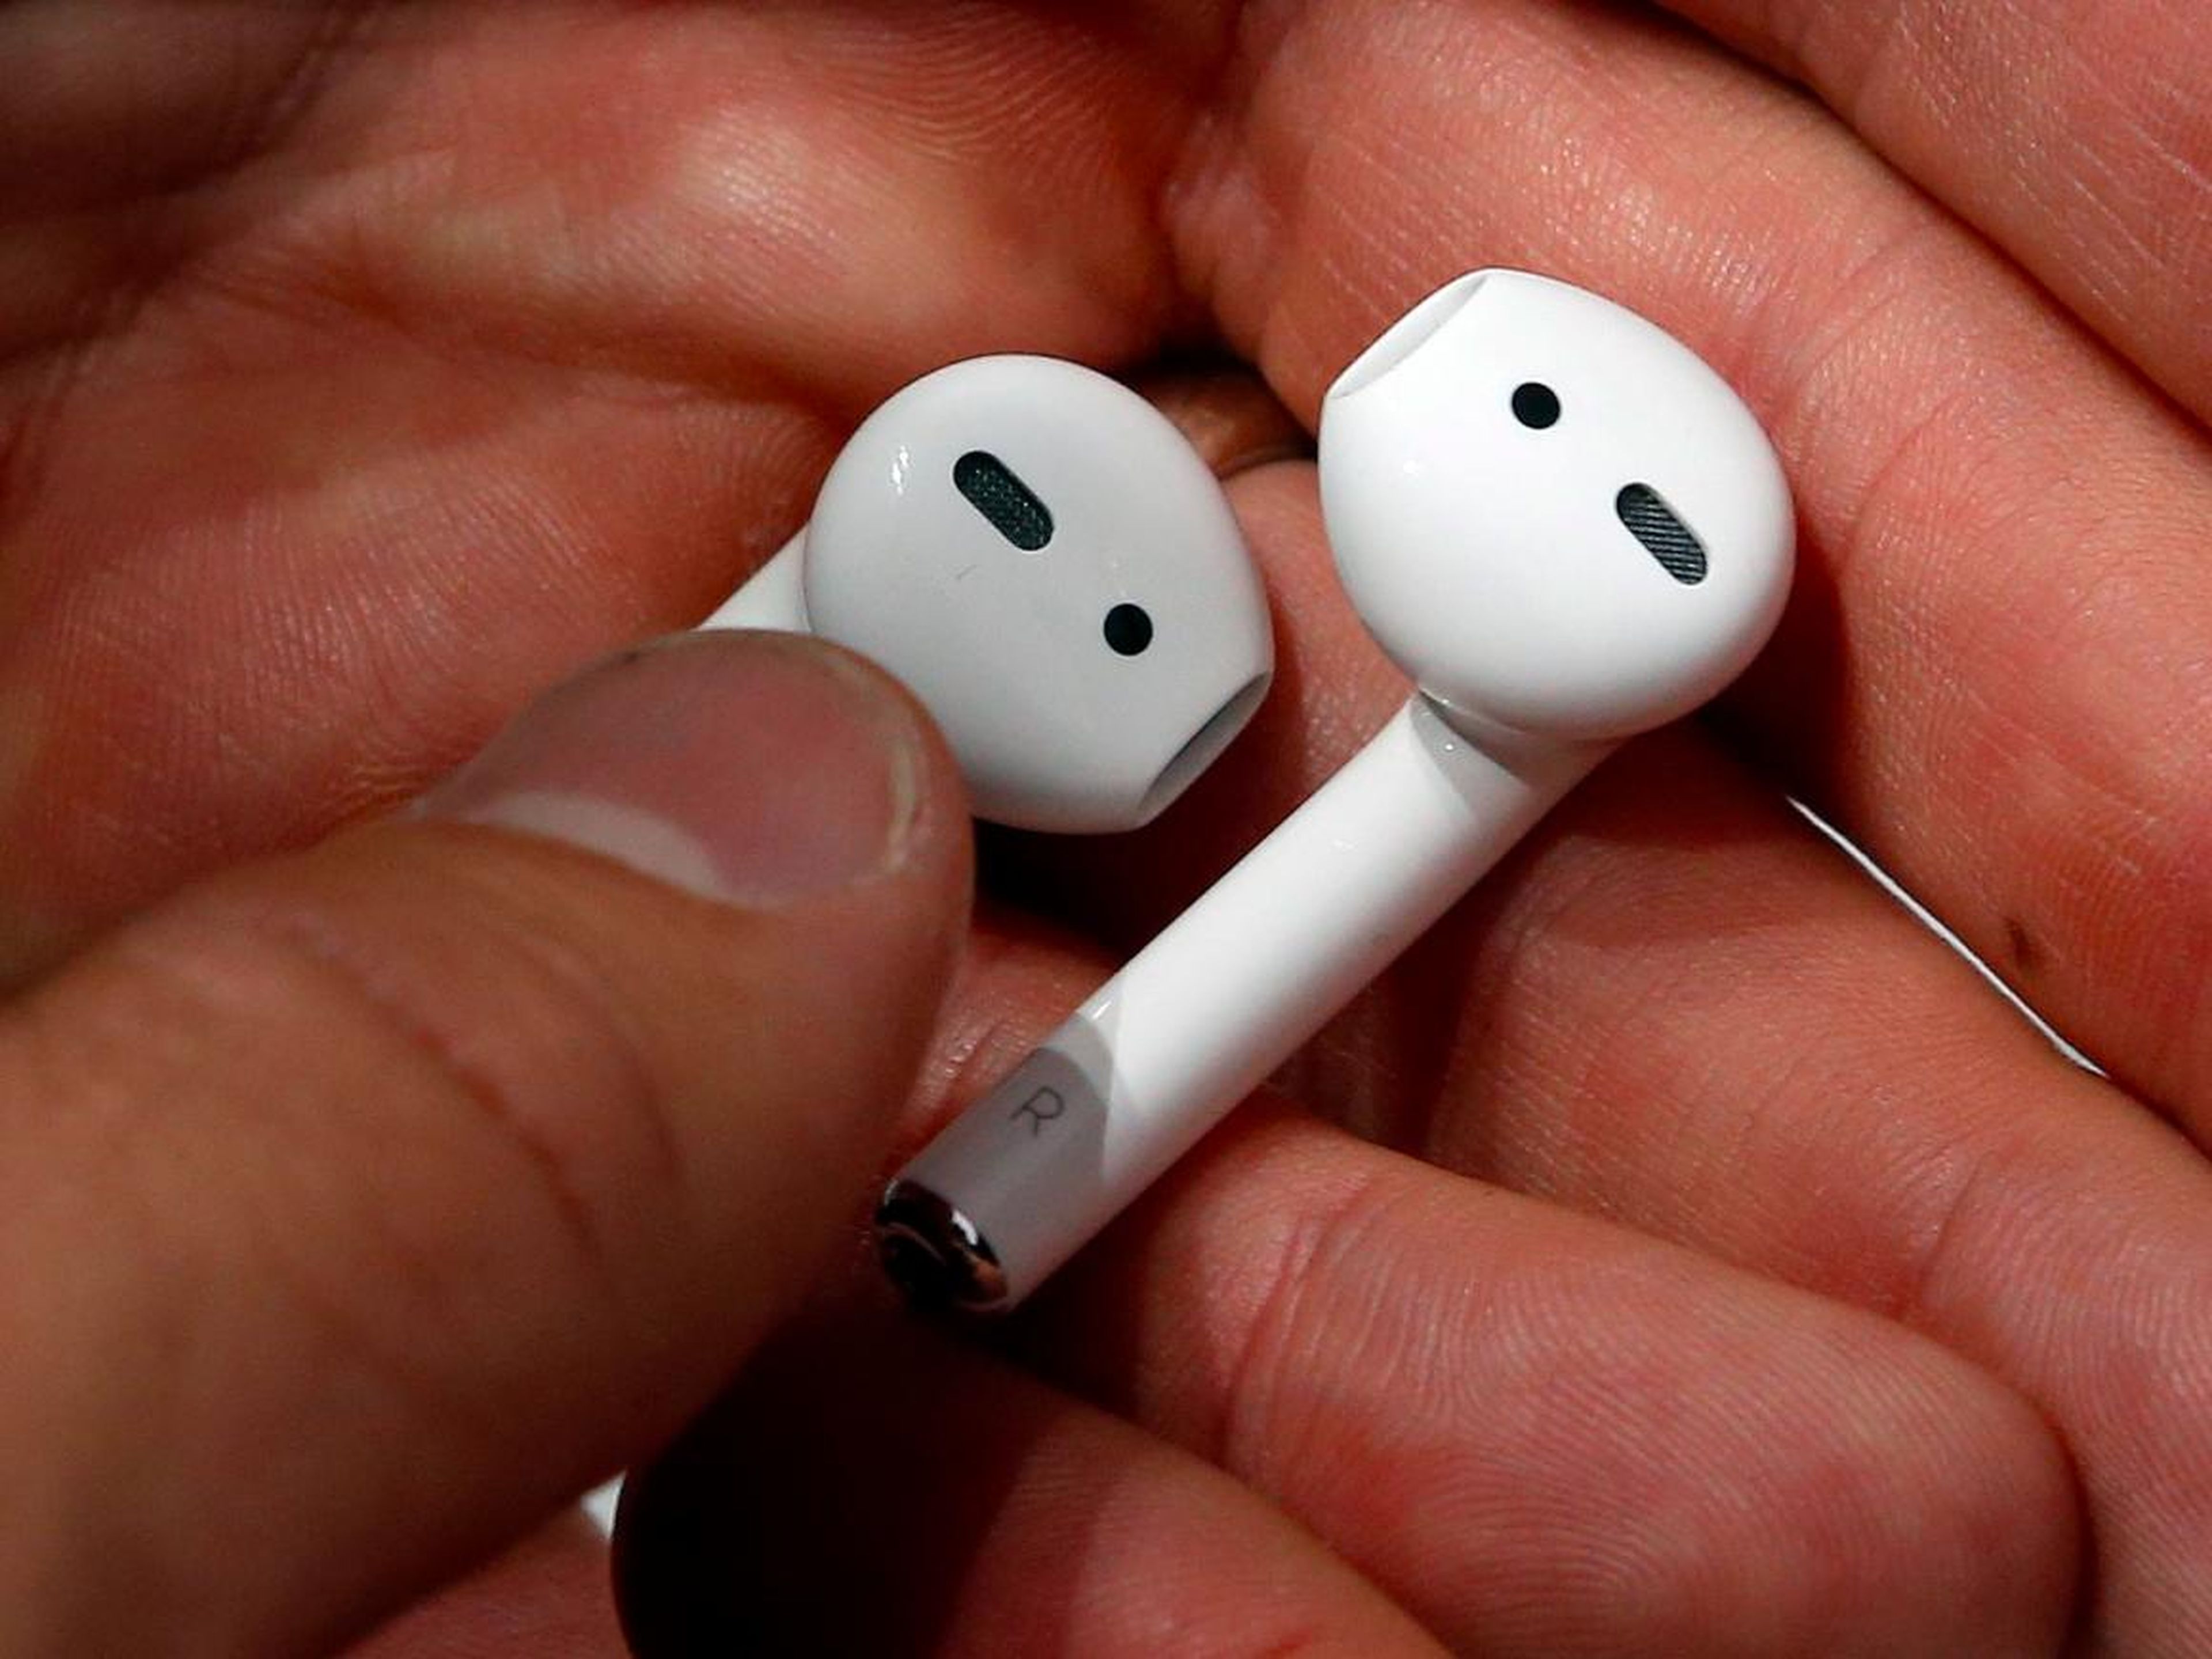 But Ming-Chi Kuo, a reliable analyst, has discussed "second-generation AirPods" with changed components.